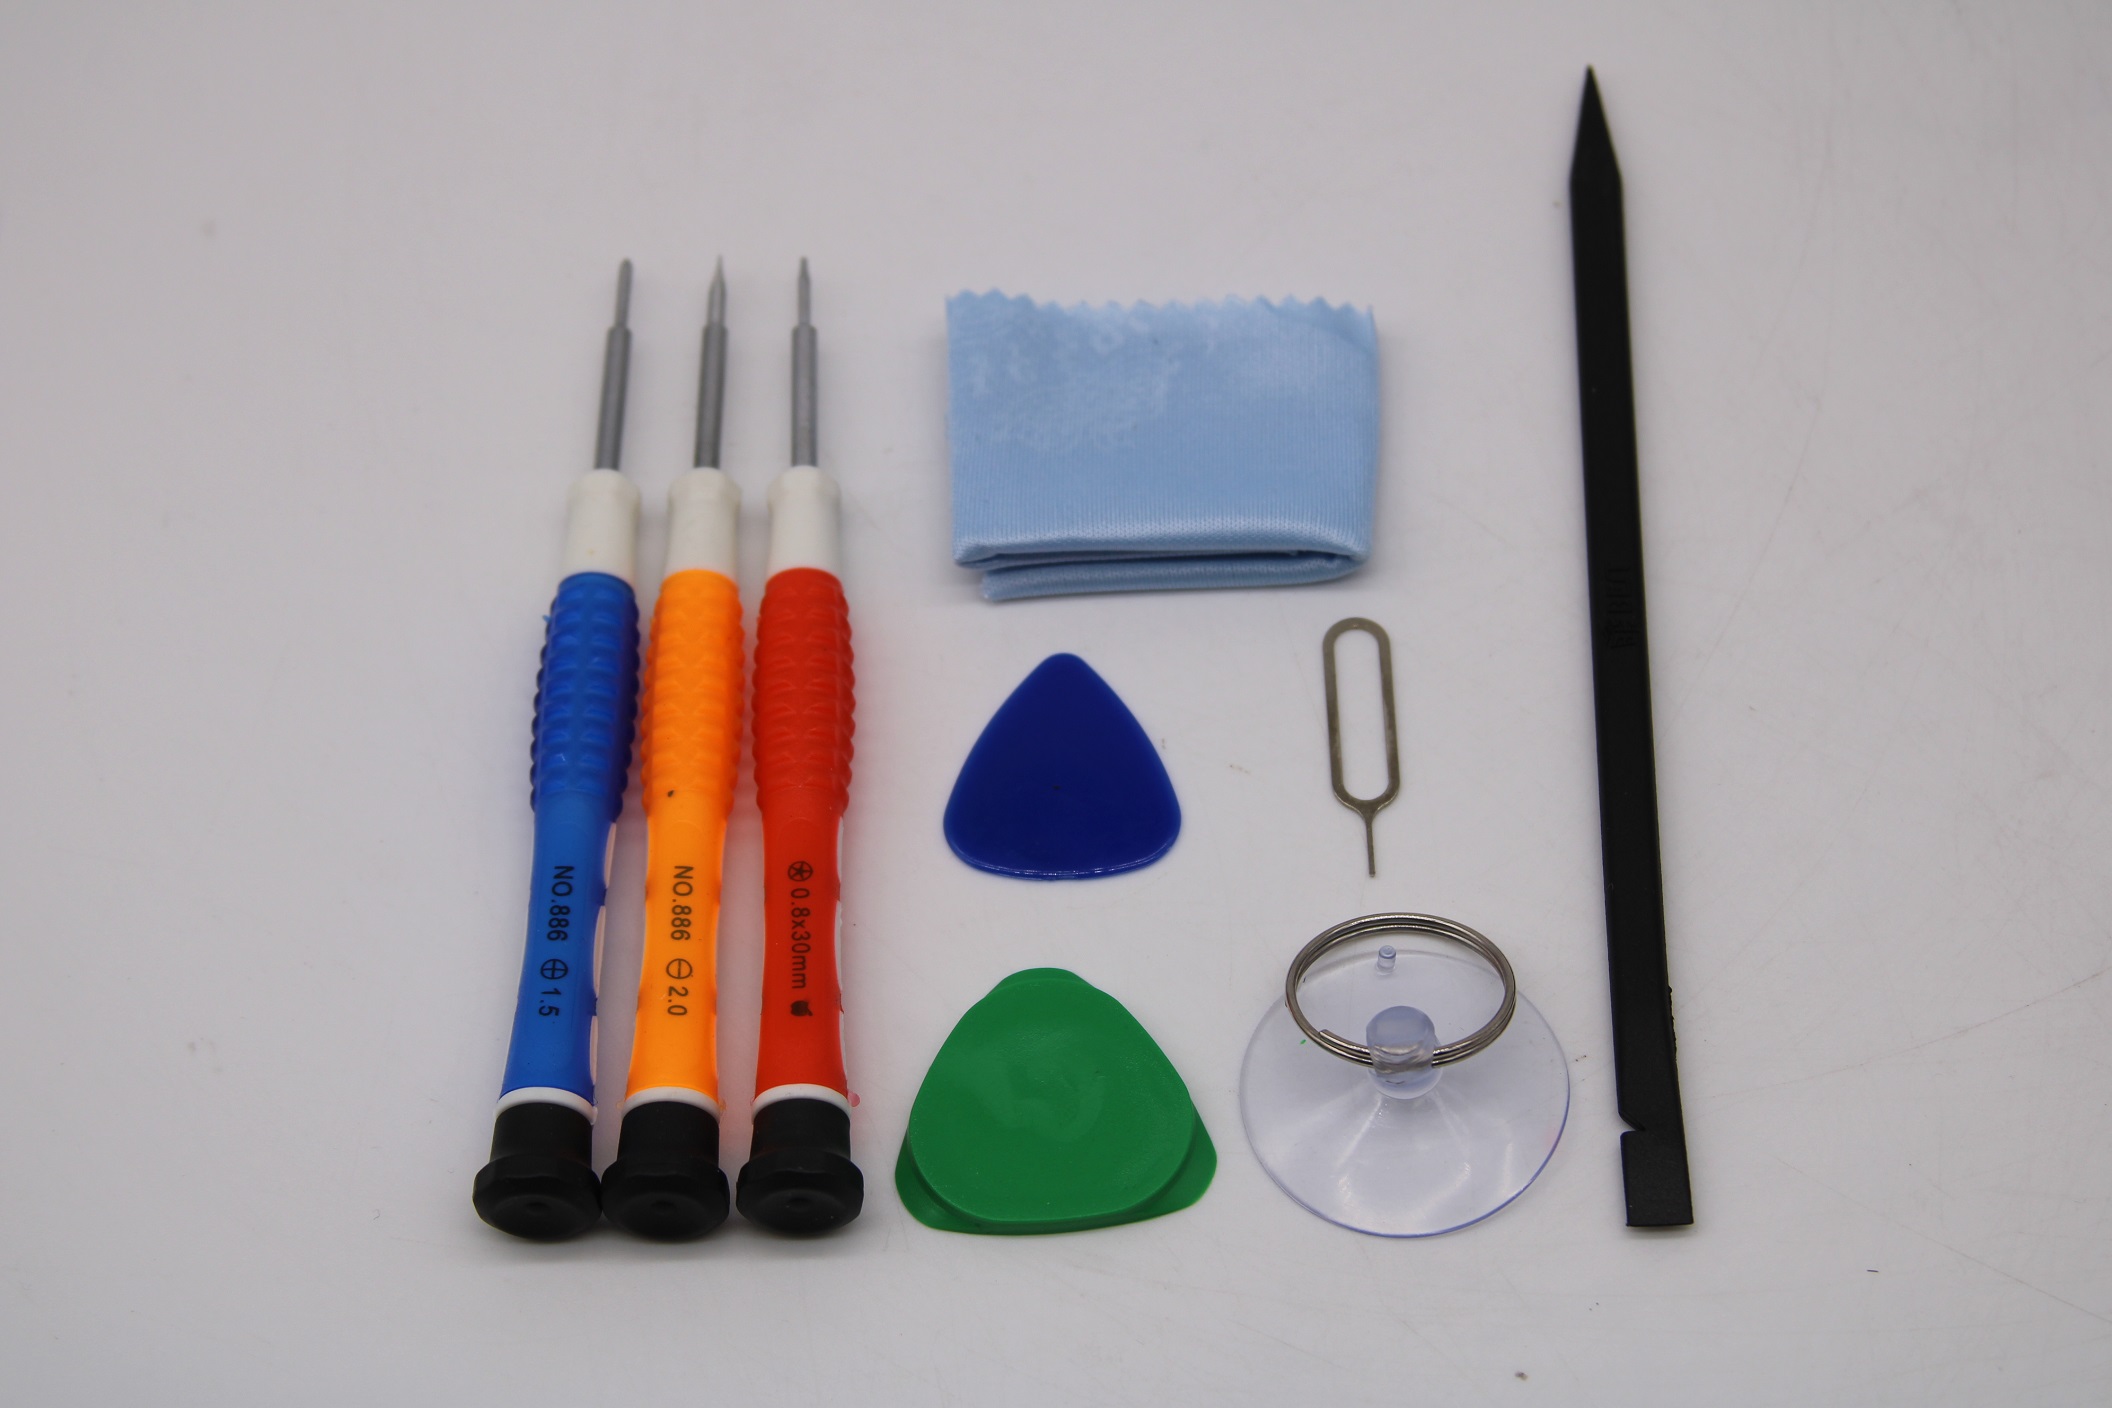 Repair Tool Screwdriver Kit For Cell Phone Smart Watch Computer PC Tablet Screen